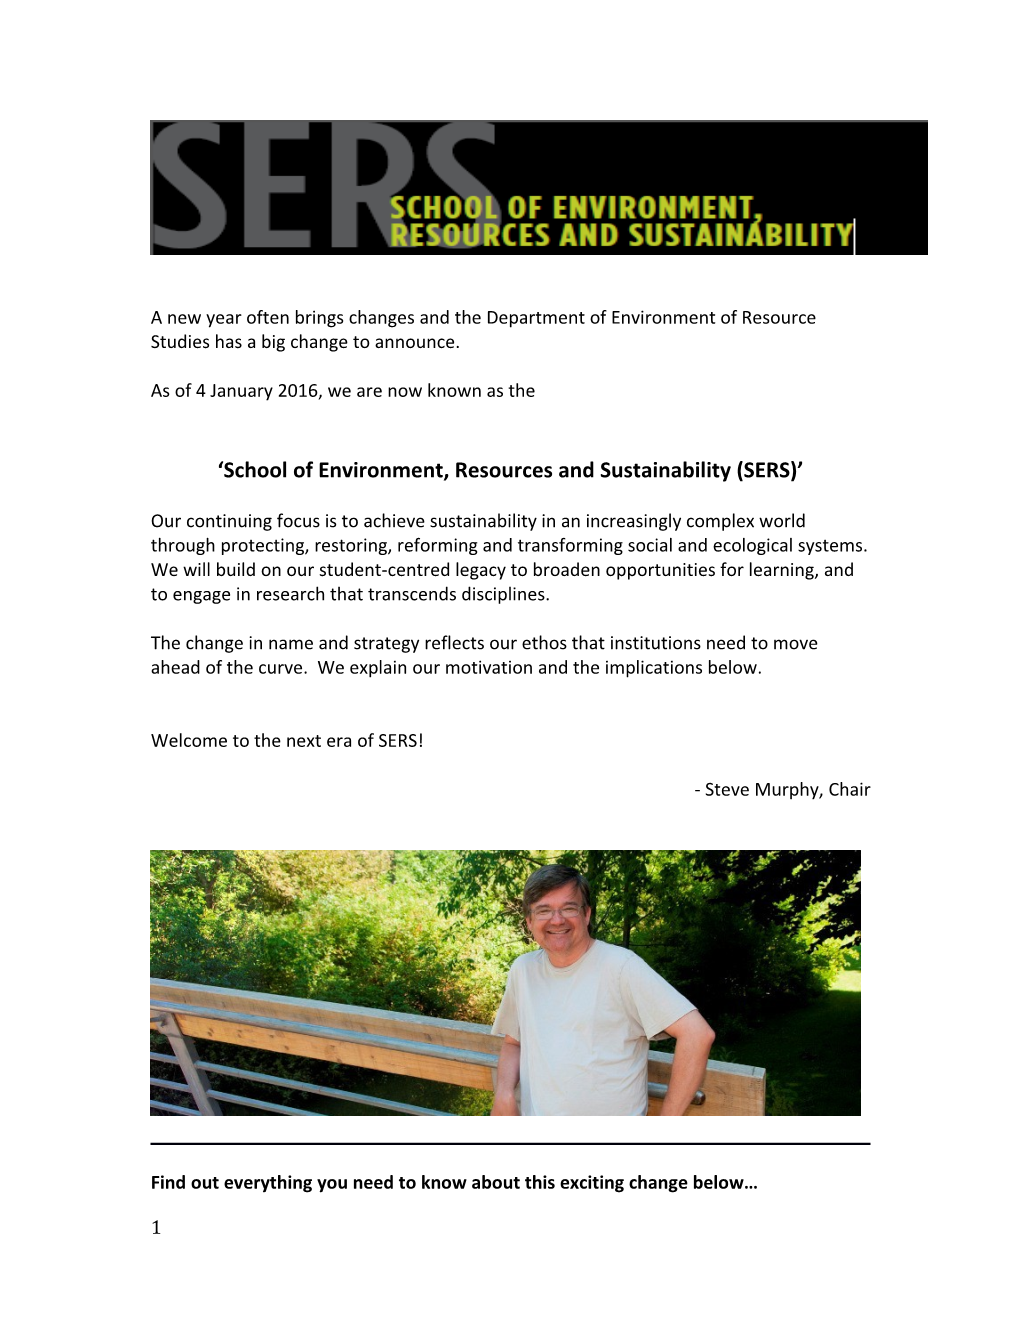 School of Environment, Resources and Sustainability (SERS)